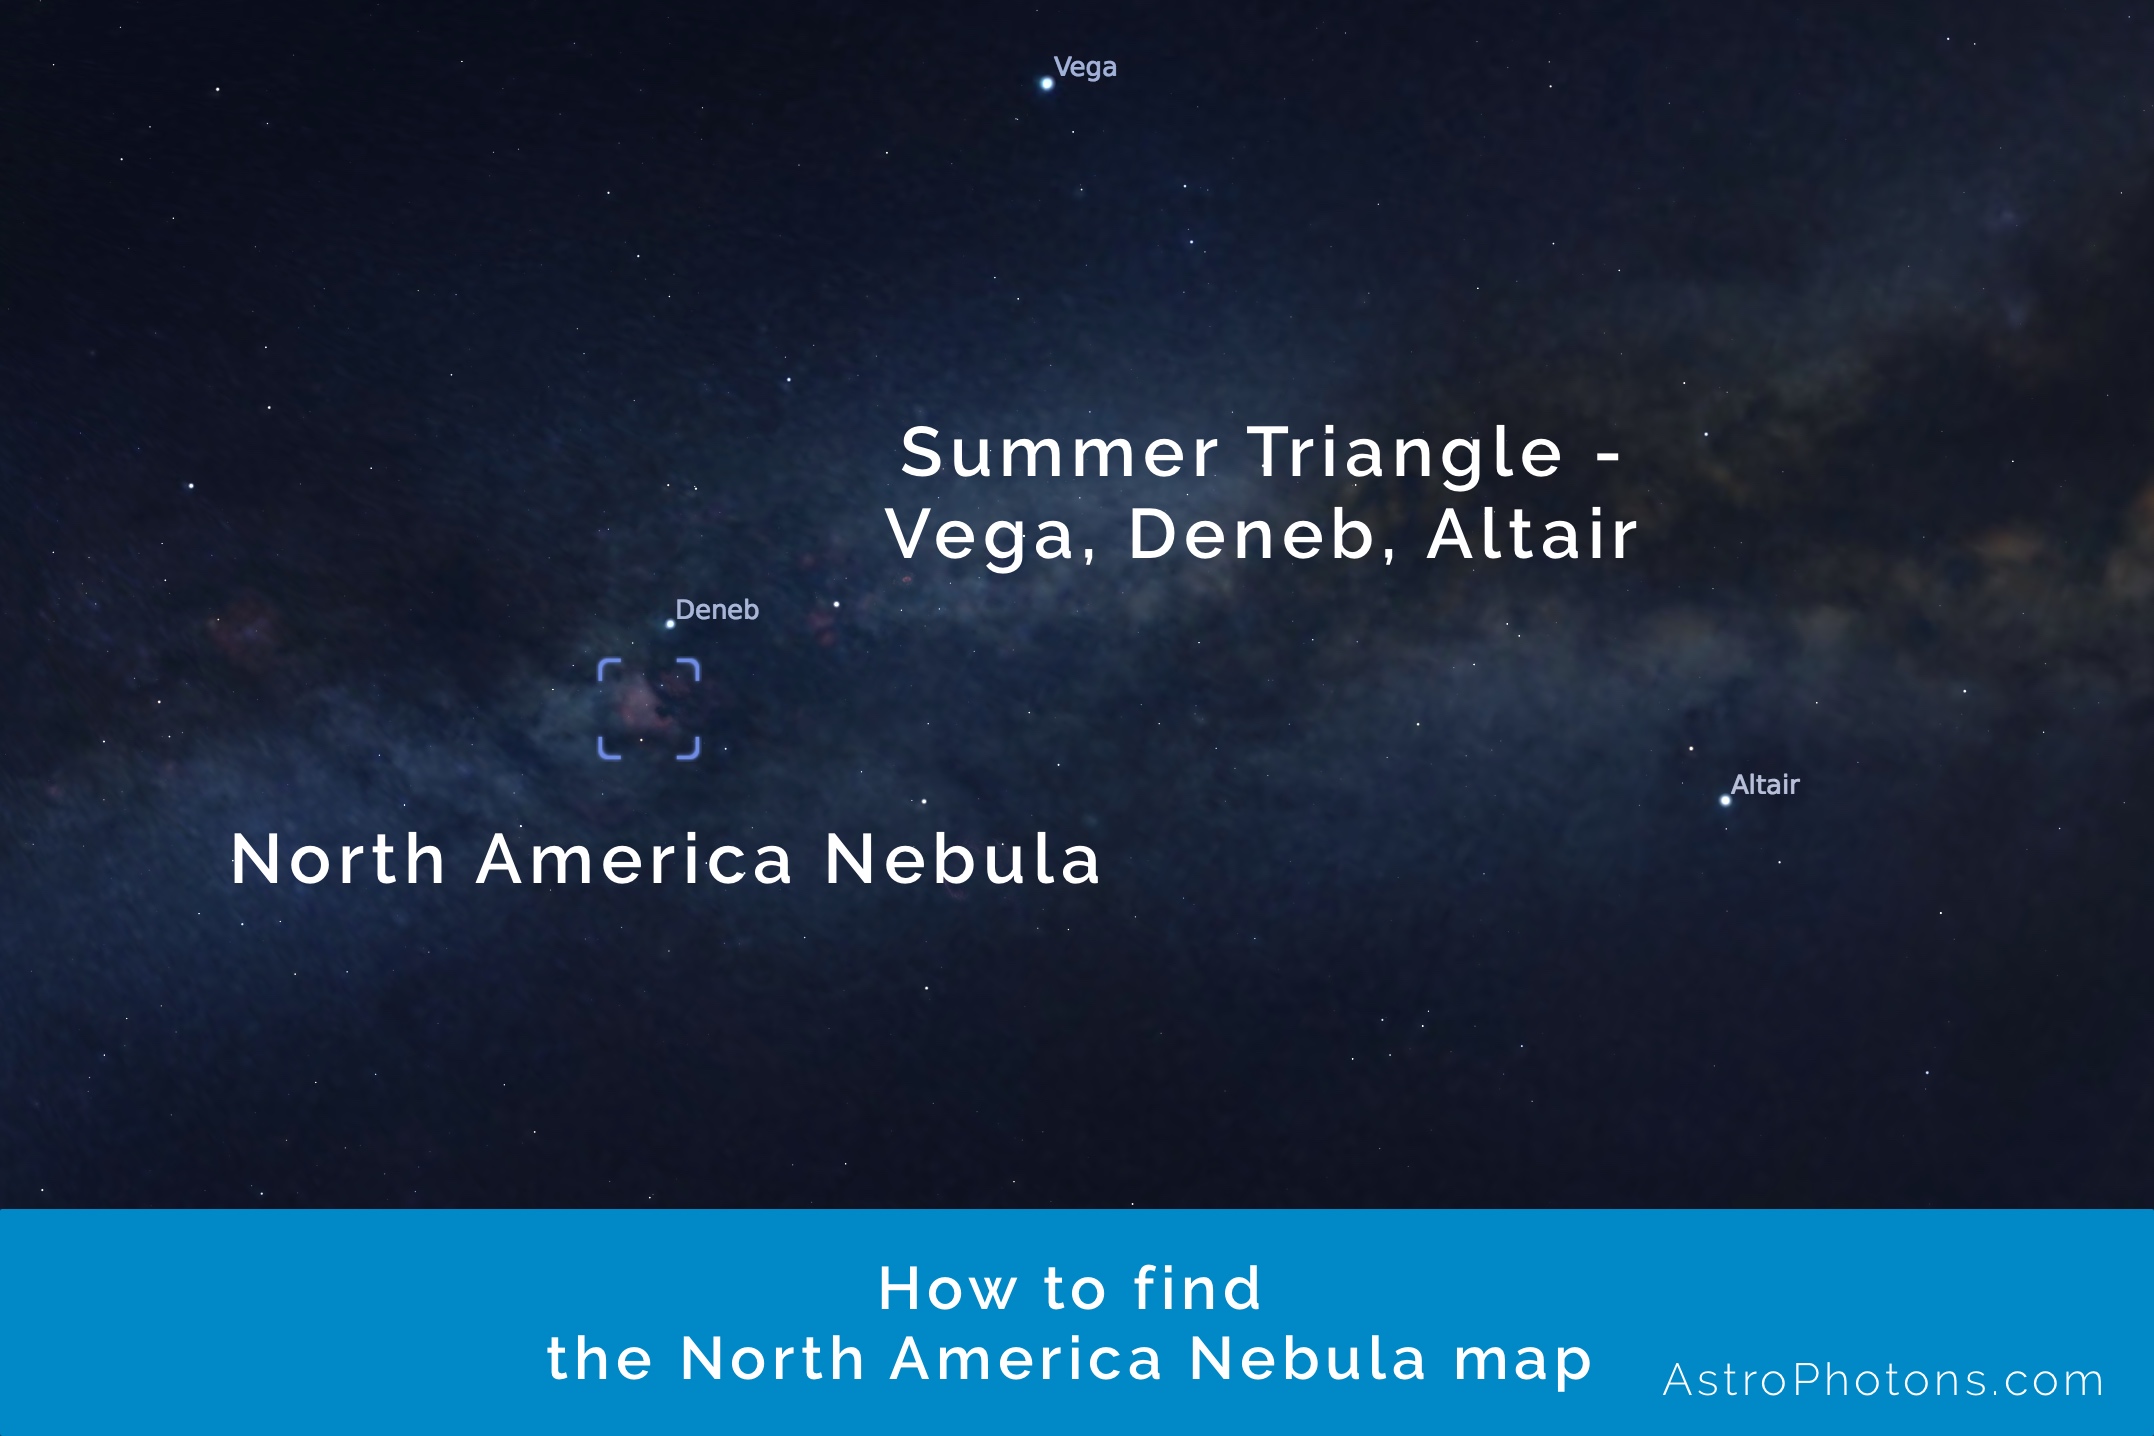 How to find North America Nebula map (location)